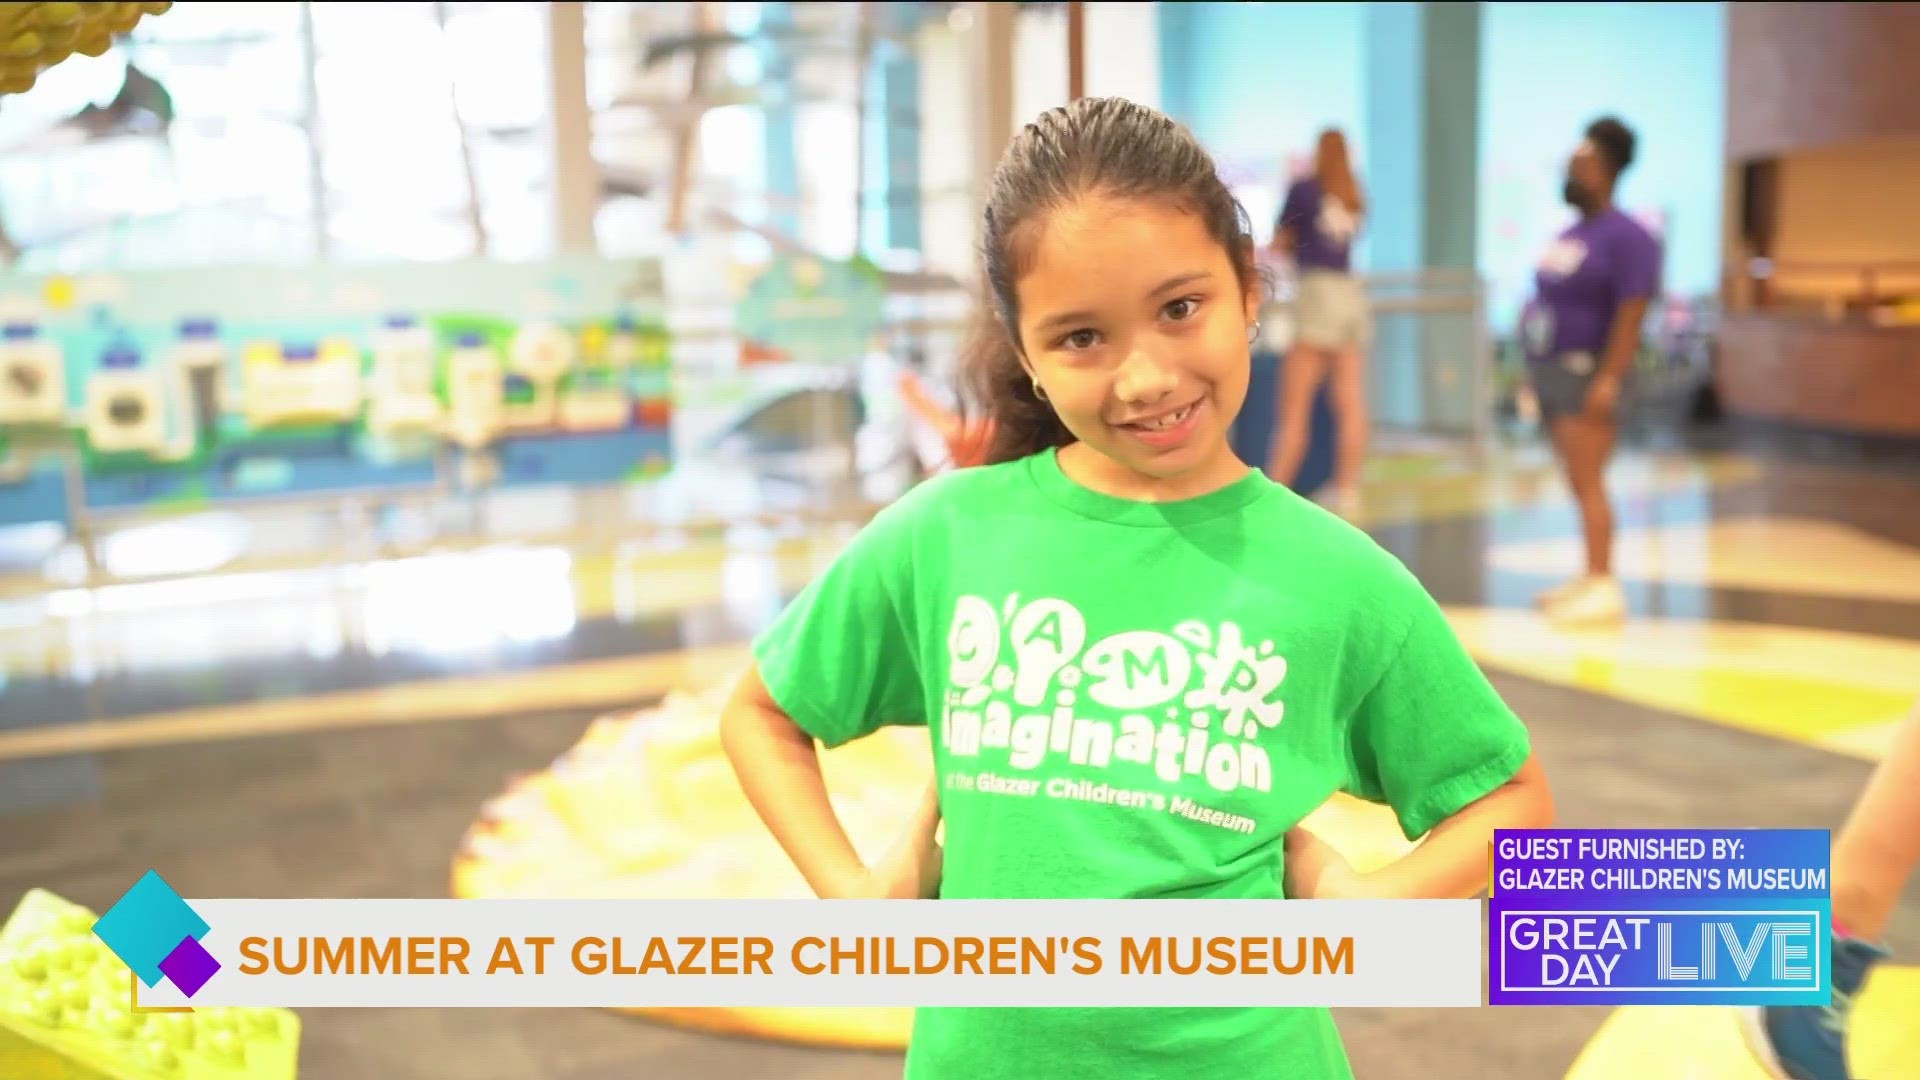 Send your kids to camp with a life-size dinosaur at the Glazer Children’s Museum. Just one of the perks you will find at Camp Imagination this summer.